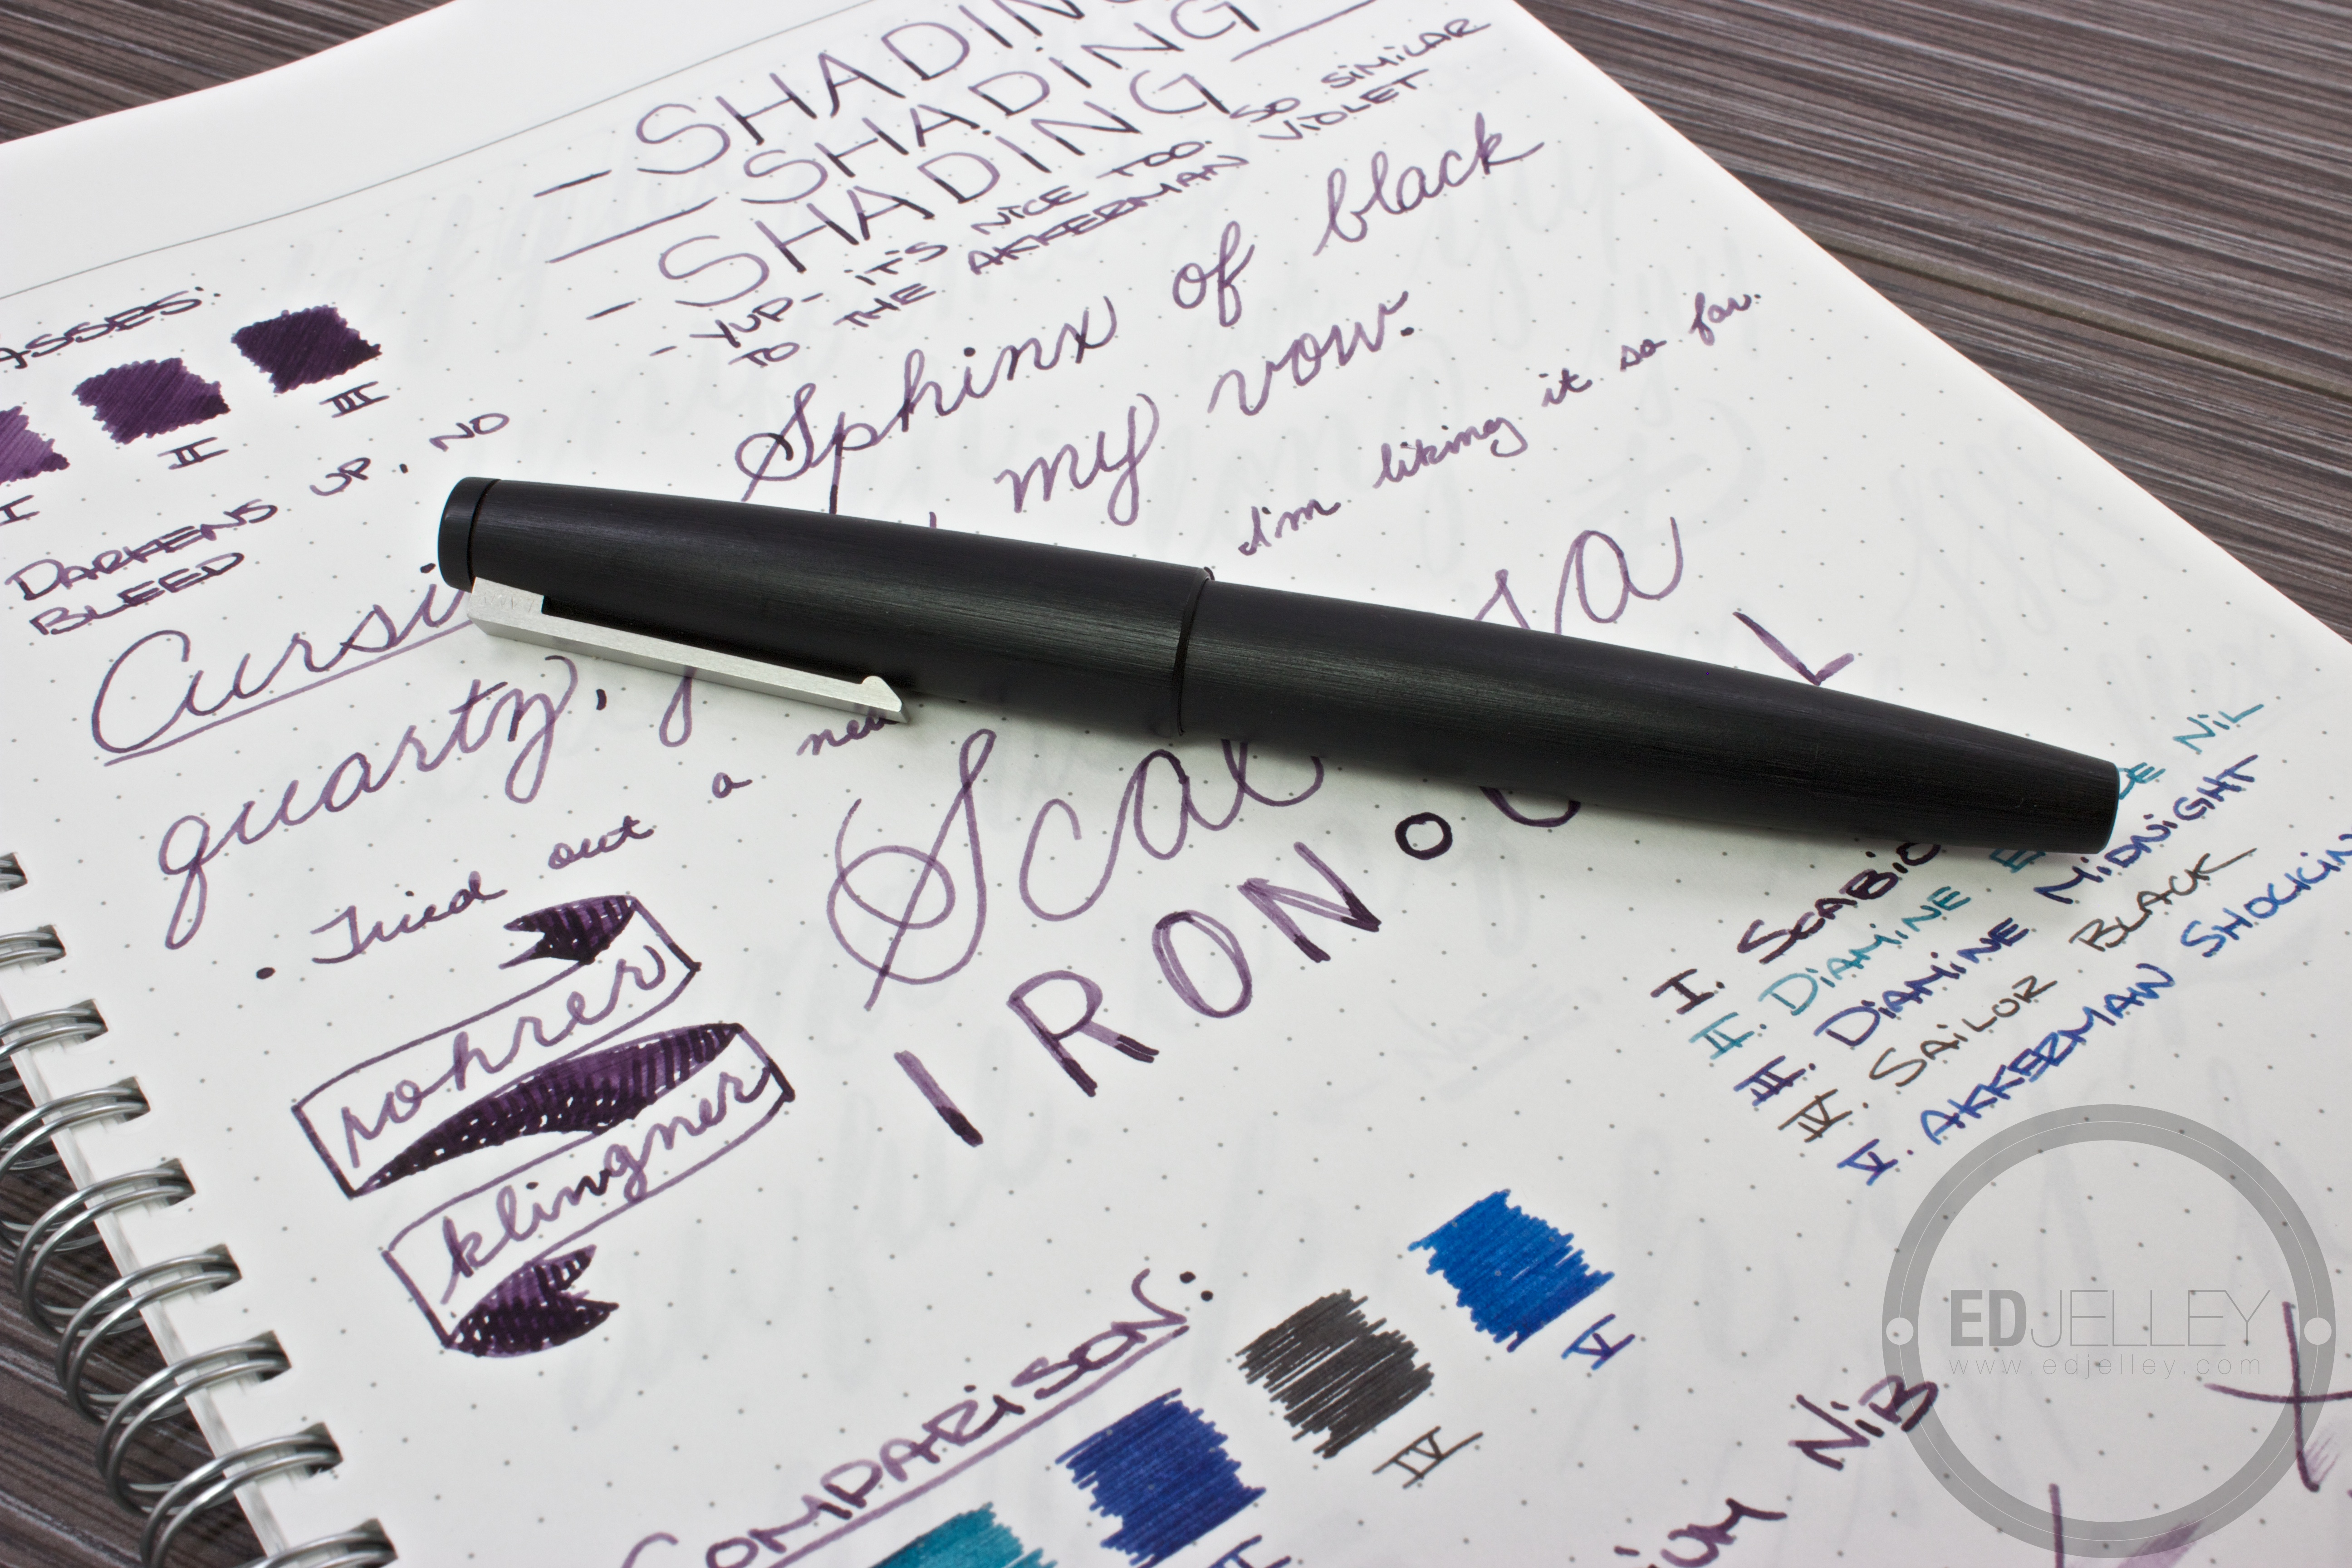 Rohrer & Klingner Scabiosa Iron Gall – Ink Review